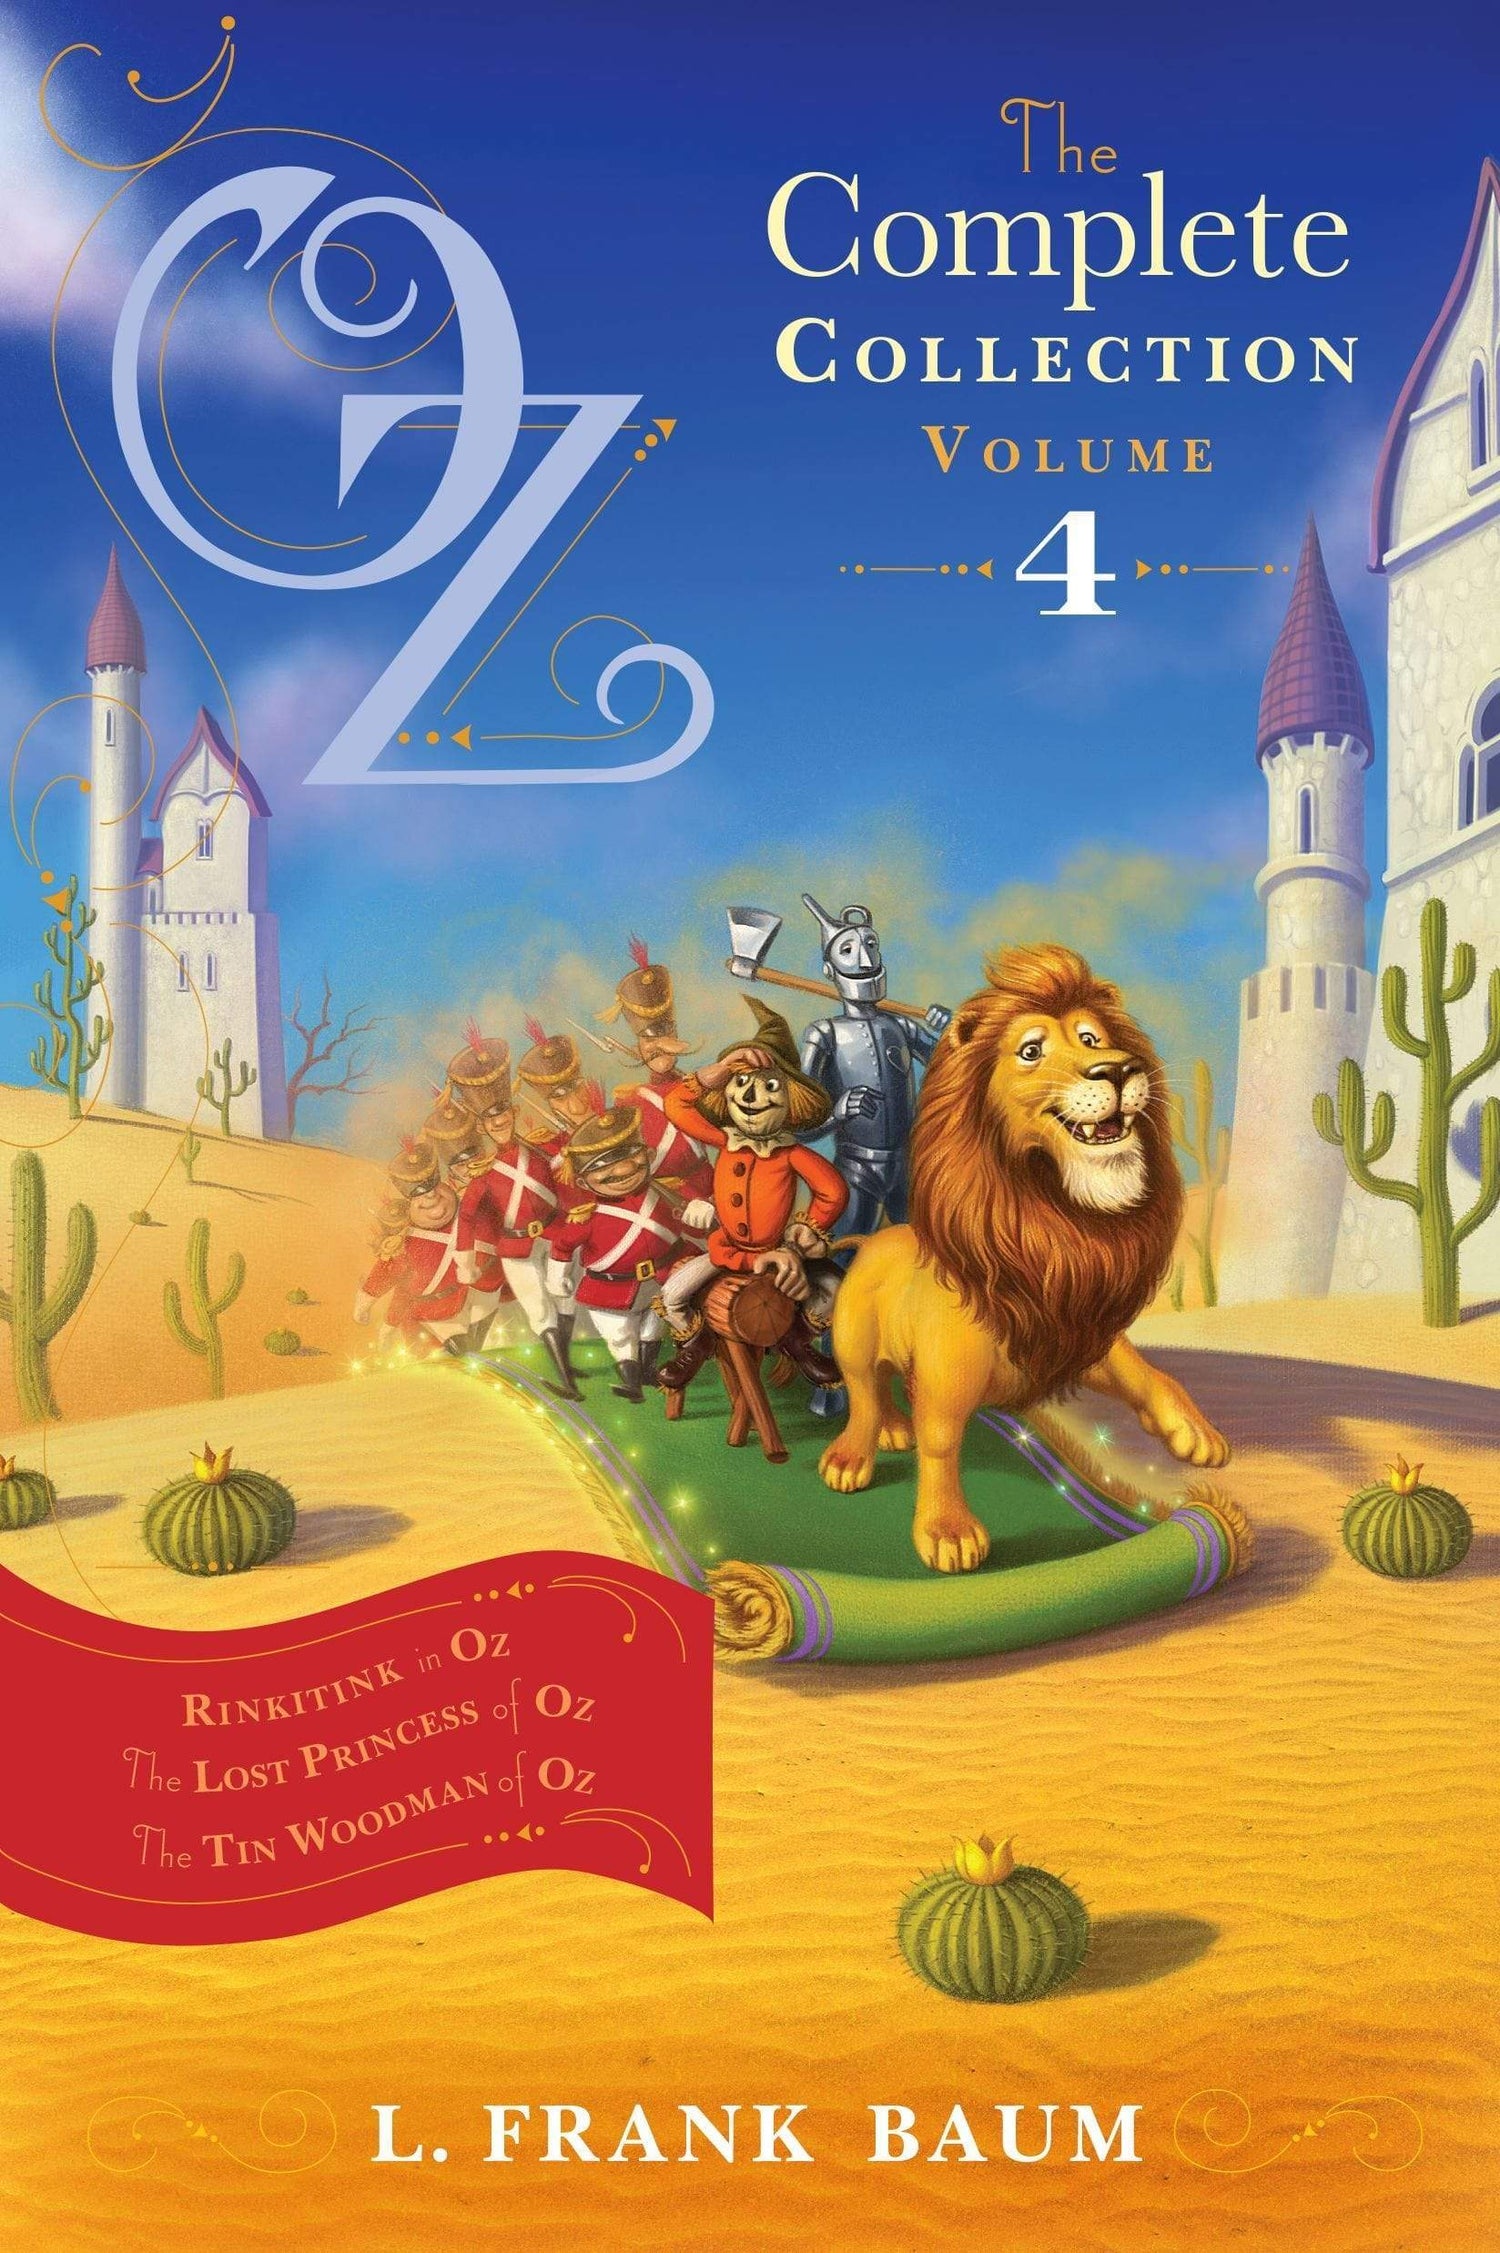 OZ THE COMPLETE COLLECTION VOL.4